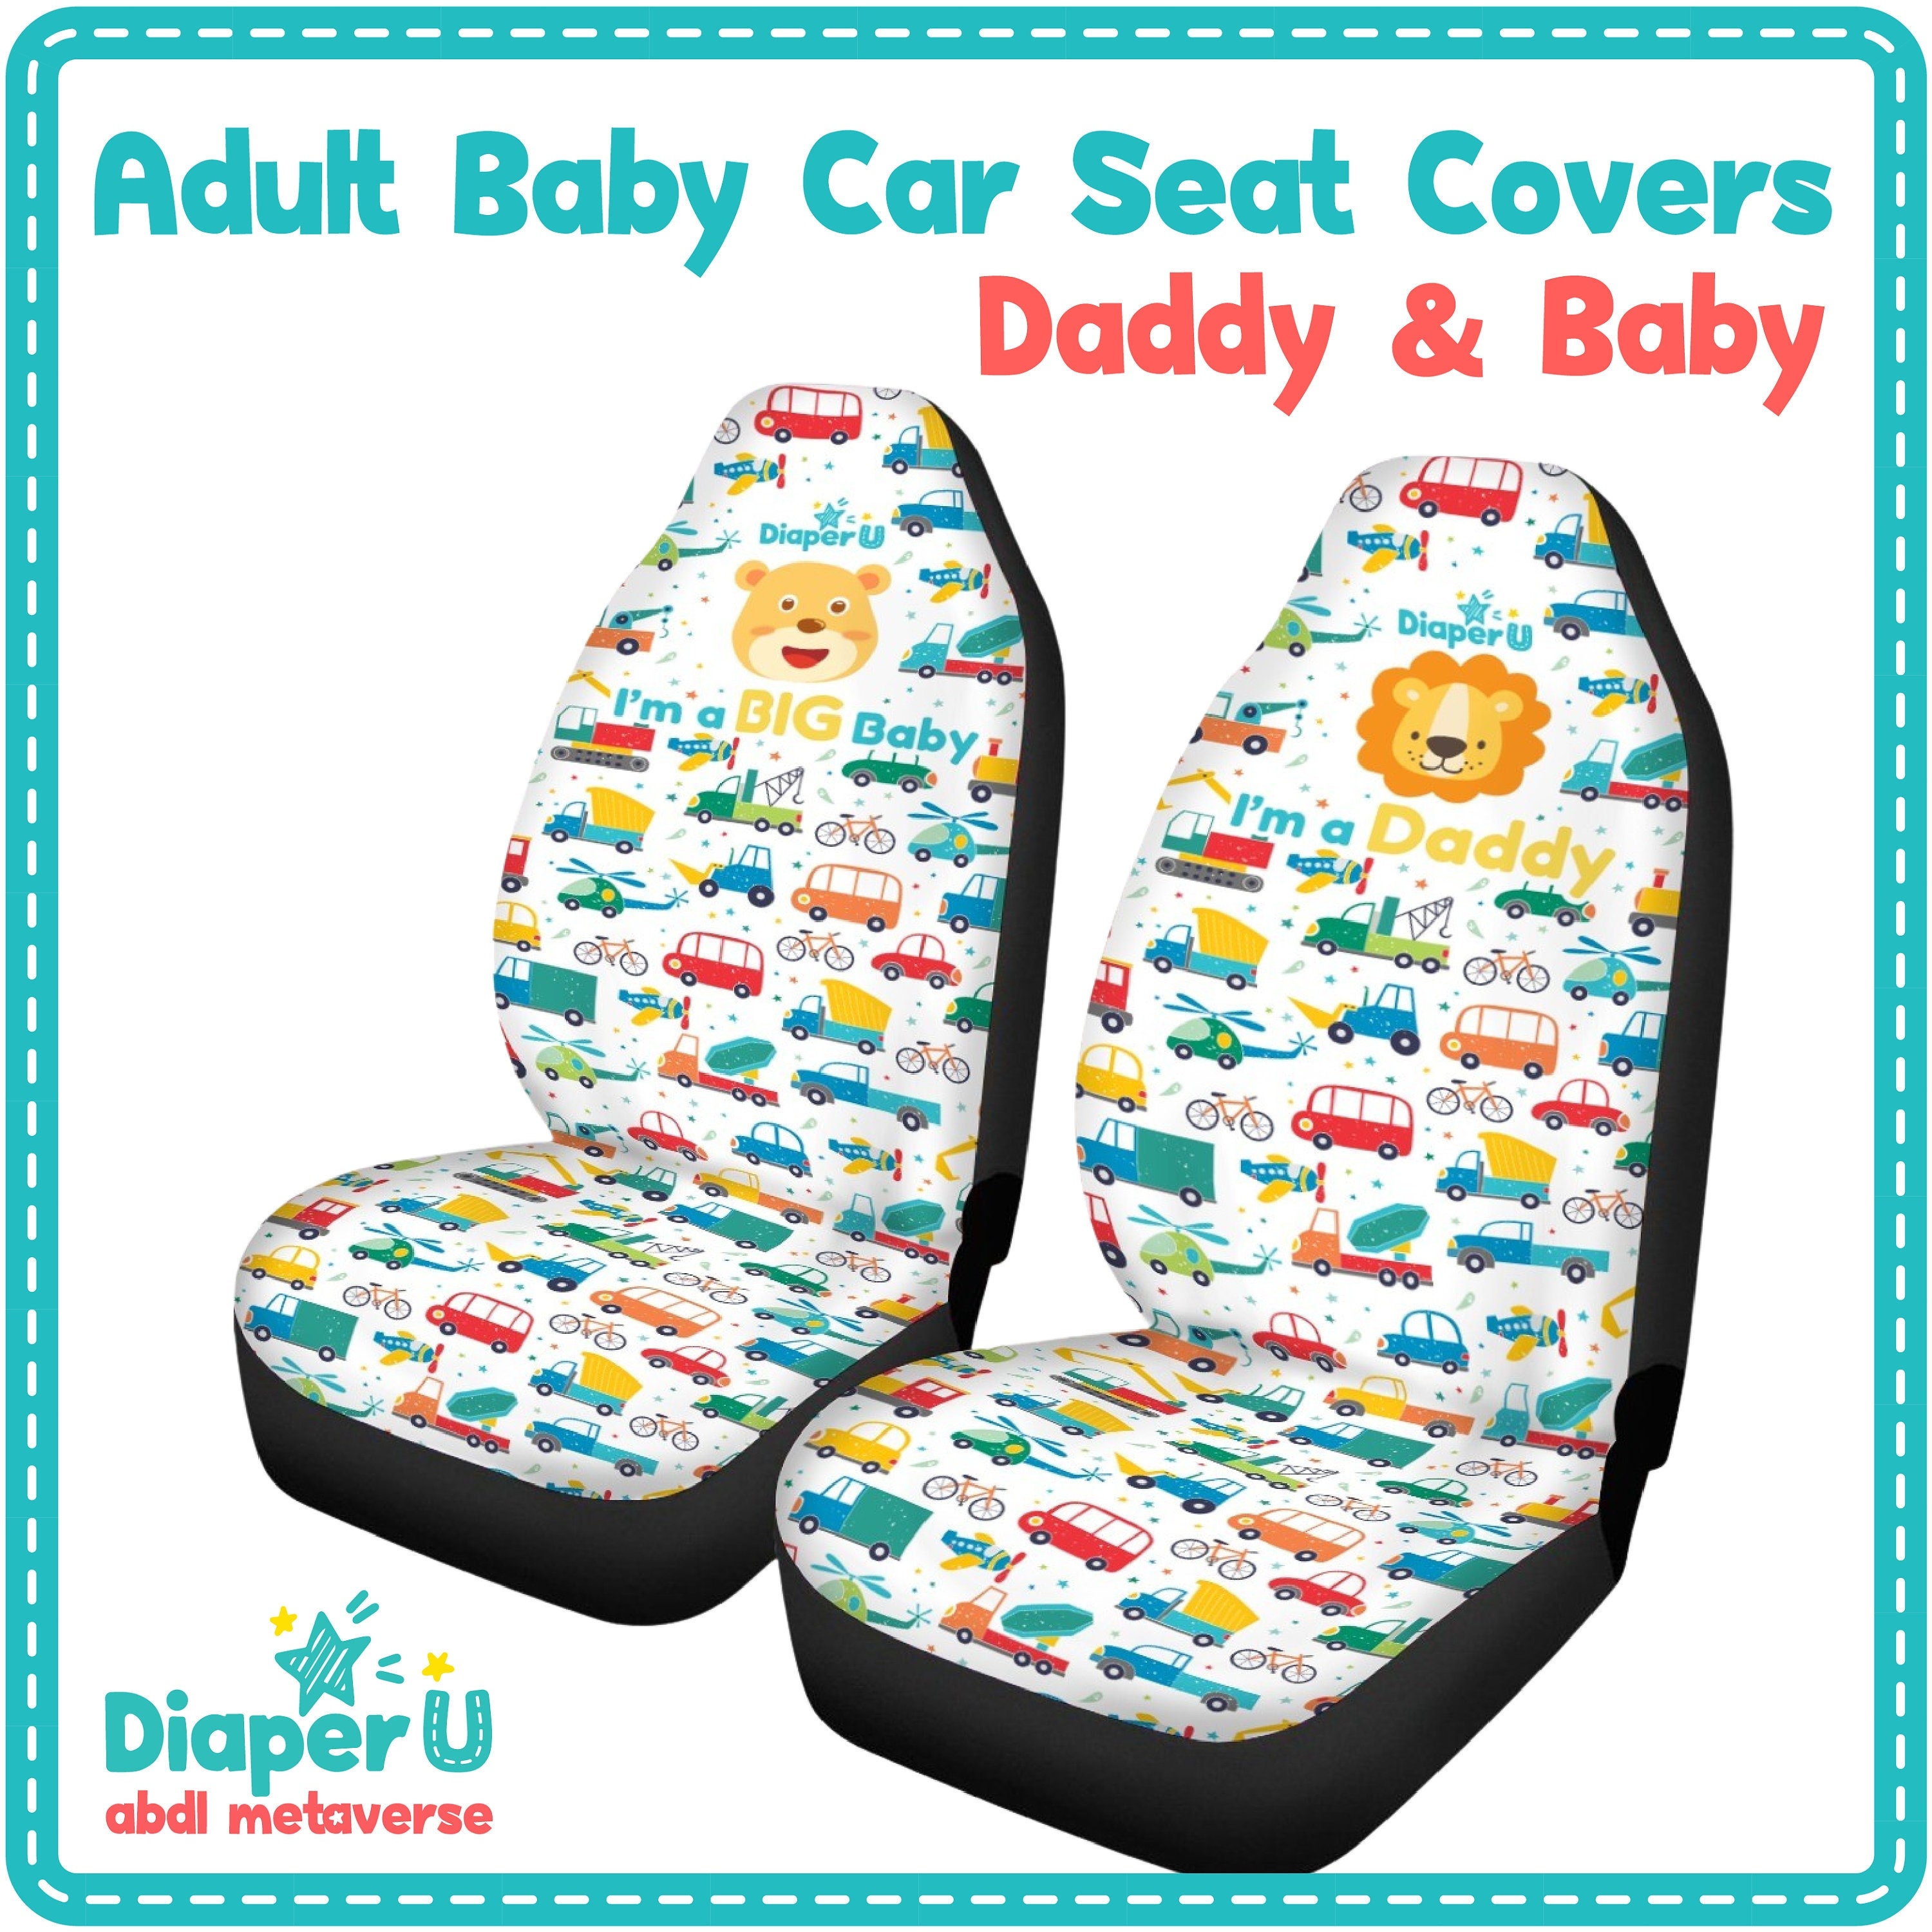 david donigian recommends Abdl Car Seat